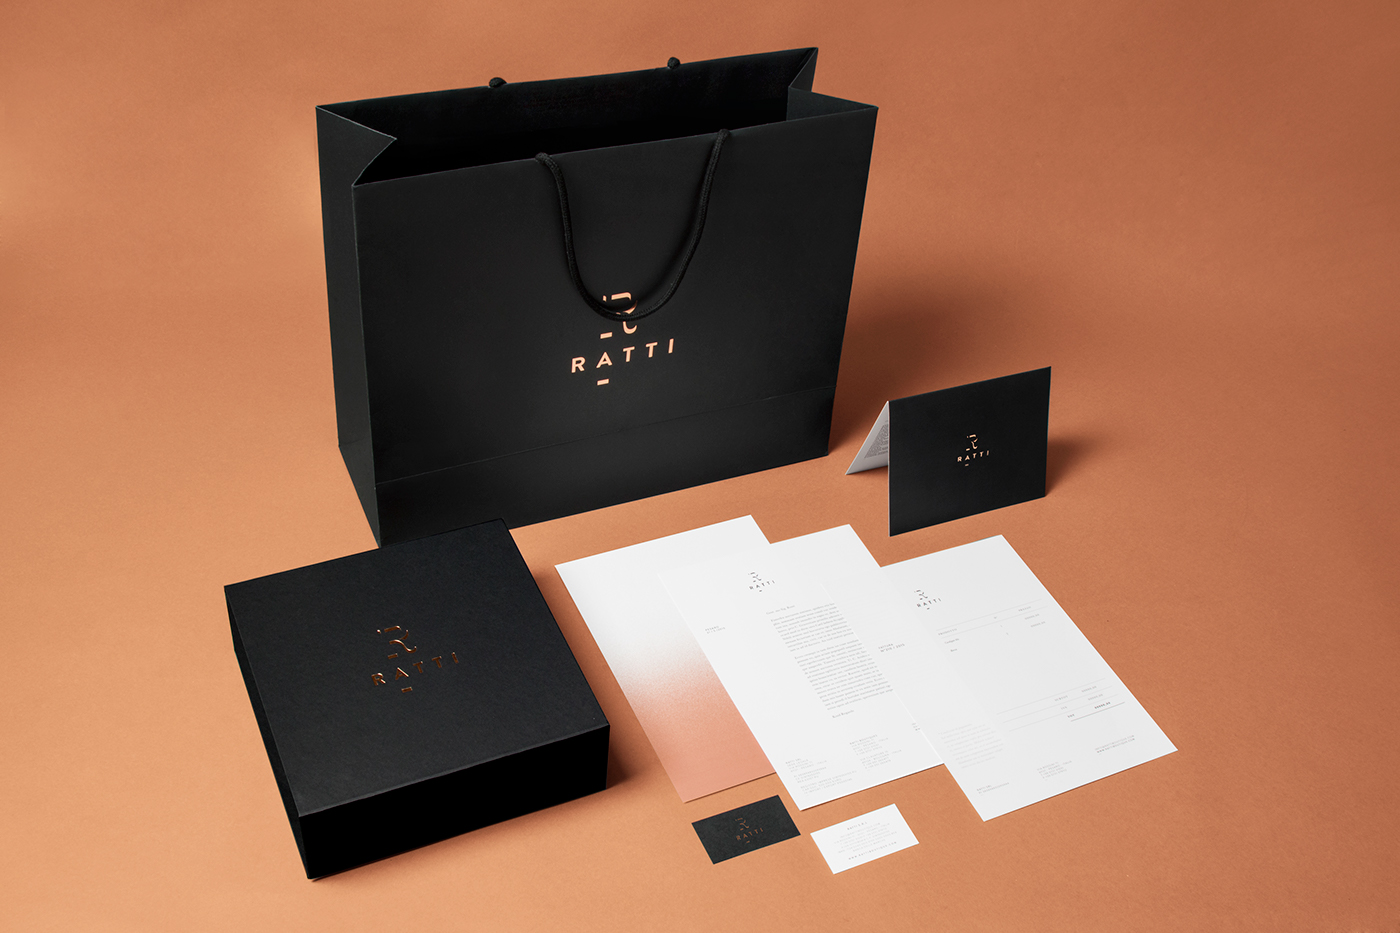 Fashion Store luxury black copper boutique foil hot-stamping Italy elegance Shopper boxes identity brand identity logo